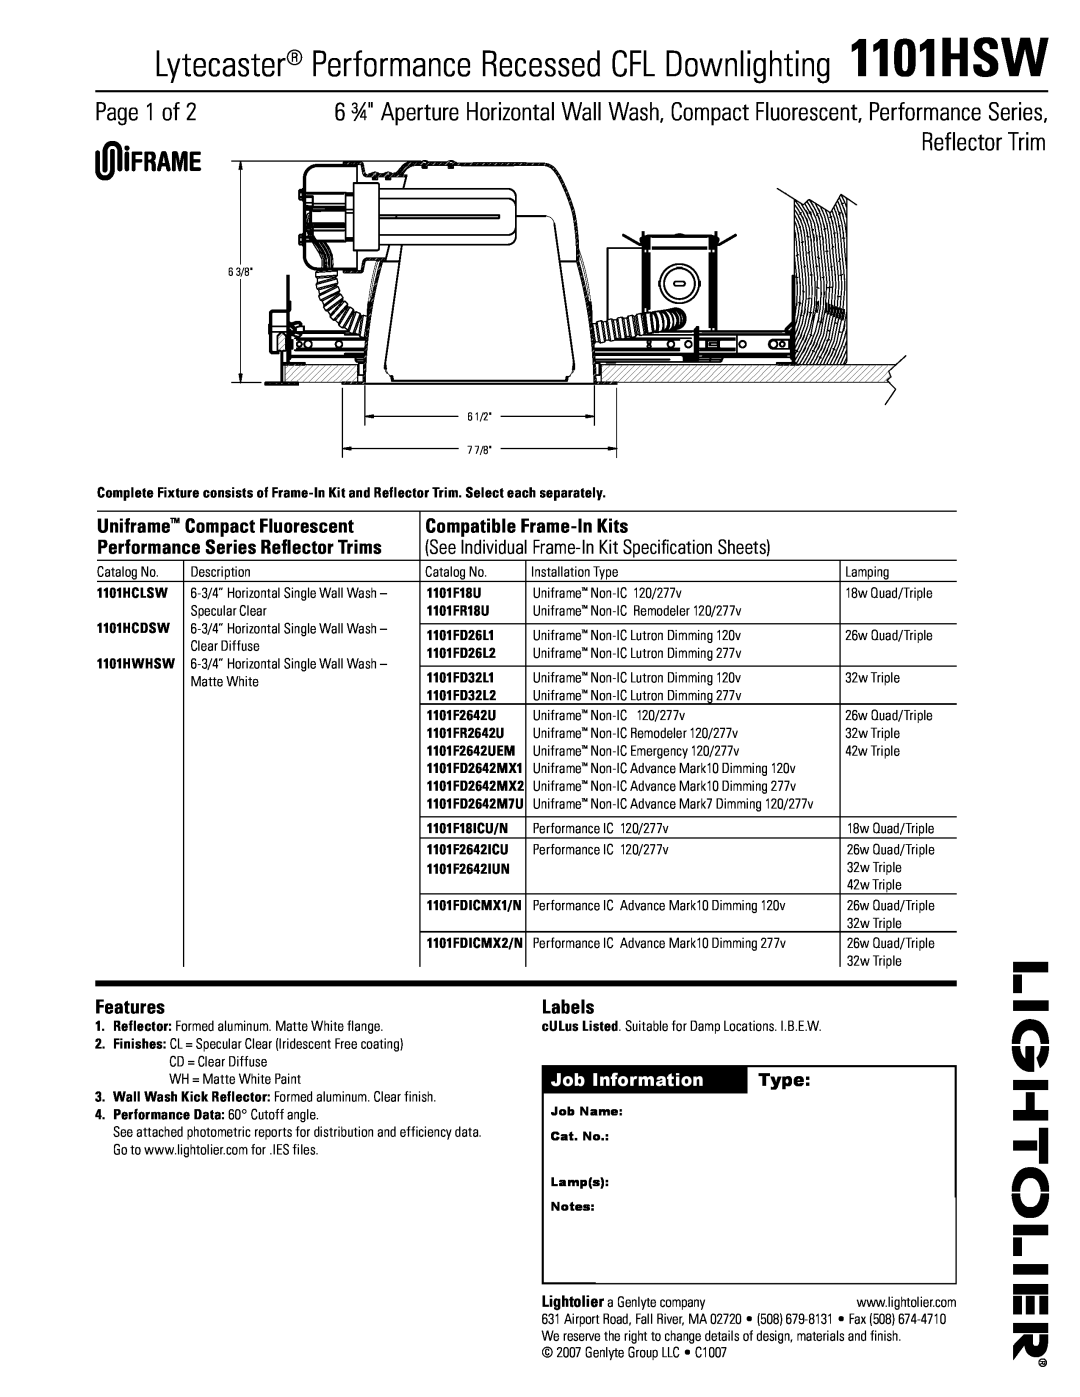 Lightolier 1101HSW specifications Page of, Reflector Trim, Job Information, Type, Uniframe Compact Fluorescent, Features 